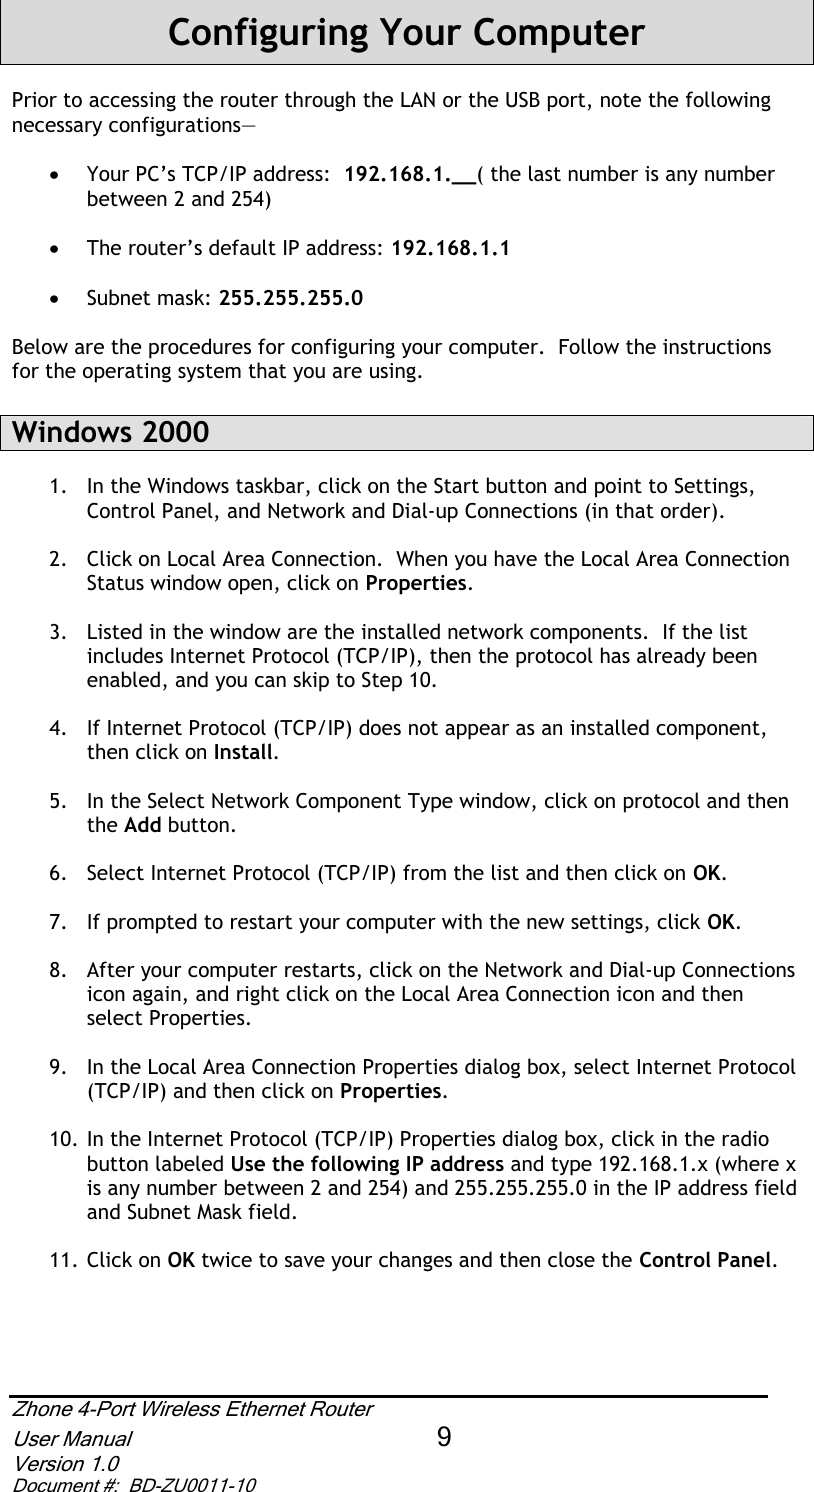 Zhone 4-Port Wireless Ethernet Router User Manual 9Version 1.0 Document #:  BD-ZU0011-10Configuring Your ComputerPrior to accessing the router through the LAN or the USB port, note the following necessary configurations— x Your PC’s TCP/IP address:  192.168.1.__( the last number is any number between 2 and 254) x The router’s default IP address: 192.168.1.1 x Subnet mask: 255.255.255.0Below are the procedures for configuring your computer.  Follow the instructions for the operating system that you are using. Windows 2000 1.  In the Windows taskbar, click on the Start button and point to Settings, Control Panel, and Network and Dial-up Connections (in that order). 2.  Click on Local Area Connection.  When you have the Local Area Connection Status window open, click on Properties.3.  Listed in the window are the installed network components.  If the list includes Internet Protocol (TCP/IP), then the protocol has already been enabled, and you can skip to Step 10. 4.  If Internet Protocol (TCP/IP) does not appear as an installed component, then click on Install.5.  In the Select Network Component Type window, click on protocol and then the Add button. 6.  Select Internet Protocol (TCP/IP) from the list and then click on OK.7.  If prompted to restart your computer with the new settings, click OK.8.  After your computer restarts, click on the Network and Dial-up Connections icon again, and right click on the Local Area Connection icon and then select Properties. 9.  In the Local Area Connection Properties dialog box, select Internet Protocol (TCP/IP) and then click on Properties.10. In the Internet Protocol (TCP/IP) Properties dialog box, click in the radio button labeled Use the following IP address and type 192.168.1.x (where x is any number between 2 and 254) and 255.255.255.0 in the IP address field and Subnet Mask field. 11. Click on OK twice to save your changes and then close the Control Panel.